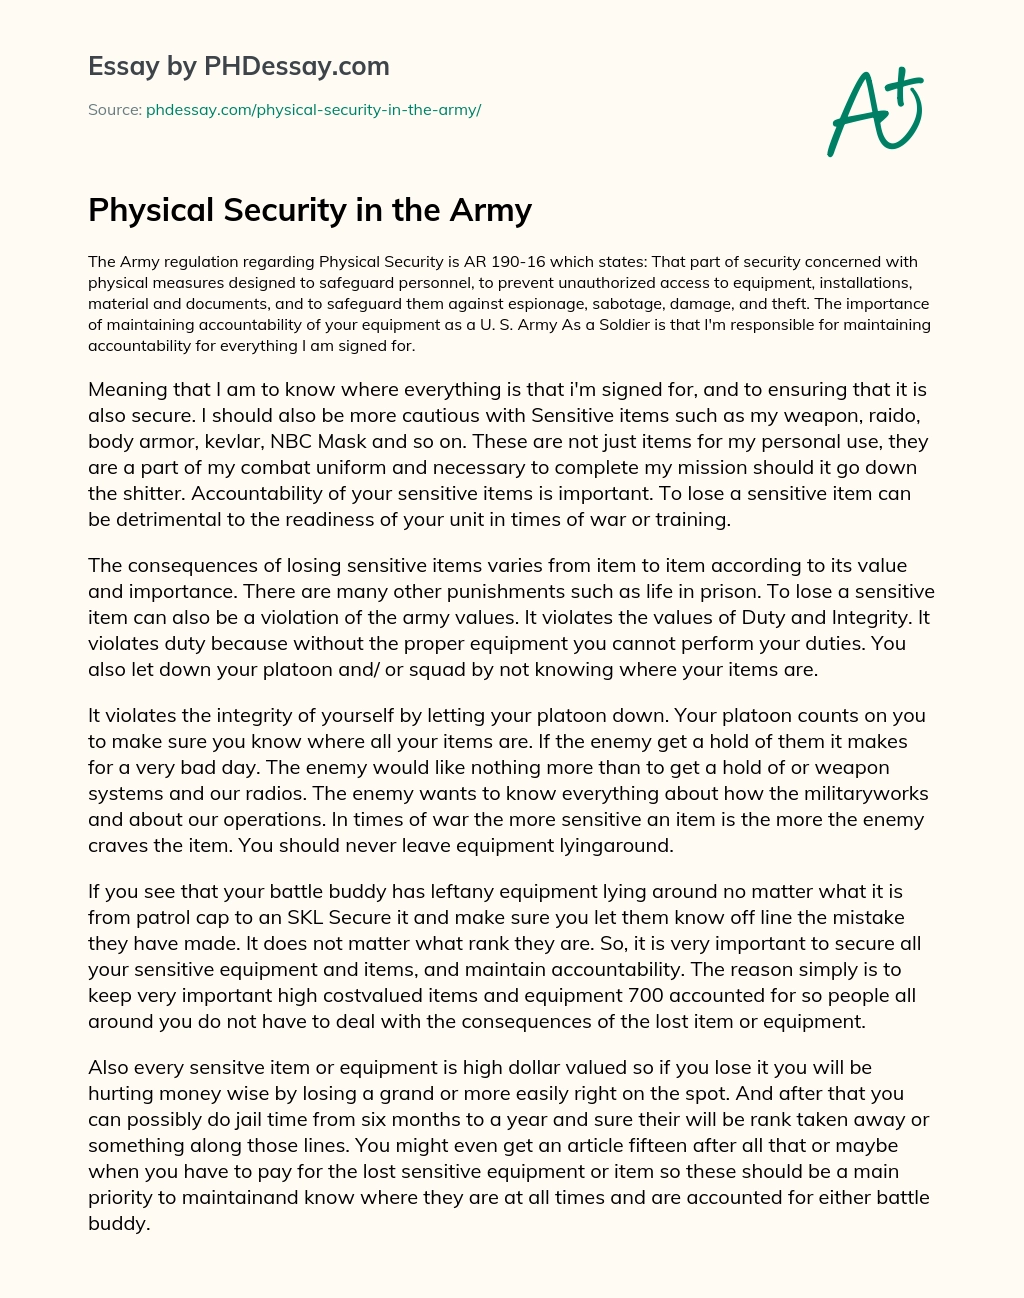 Physical Security in the Army essay